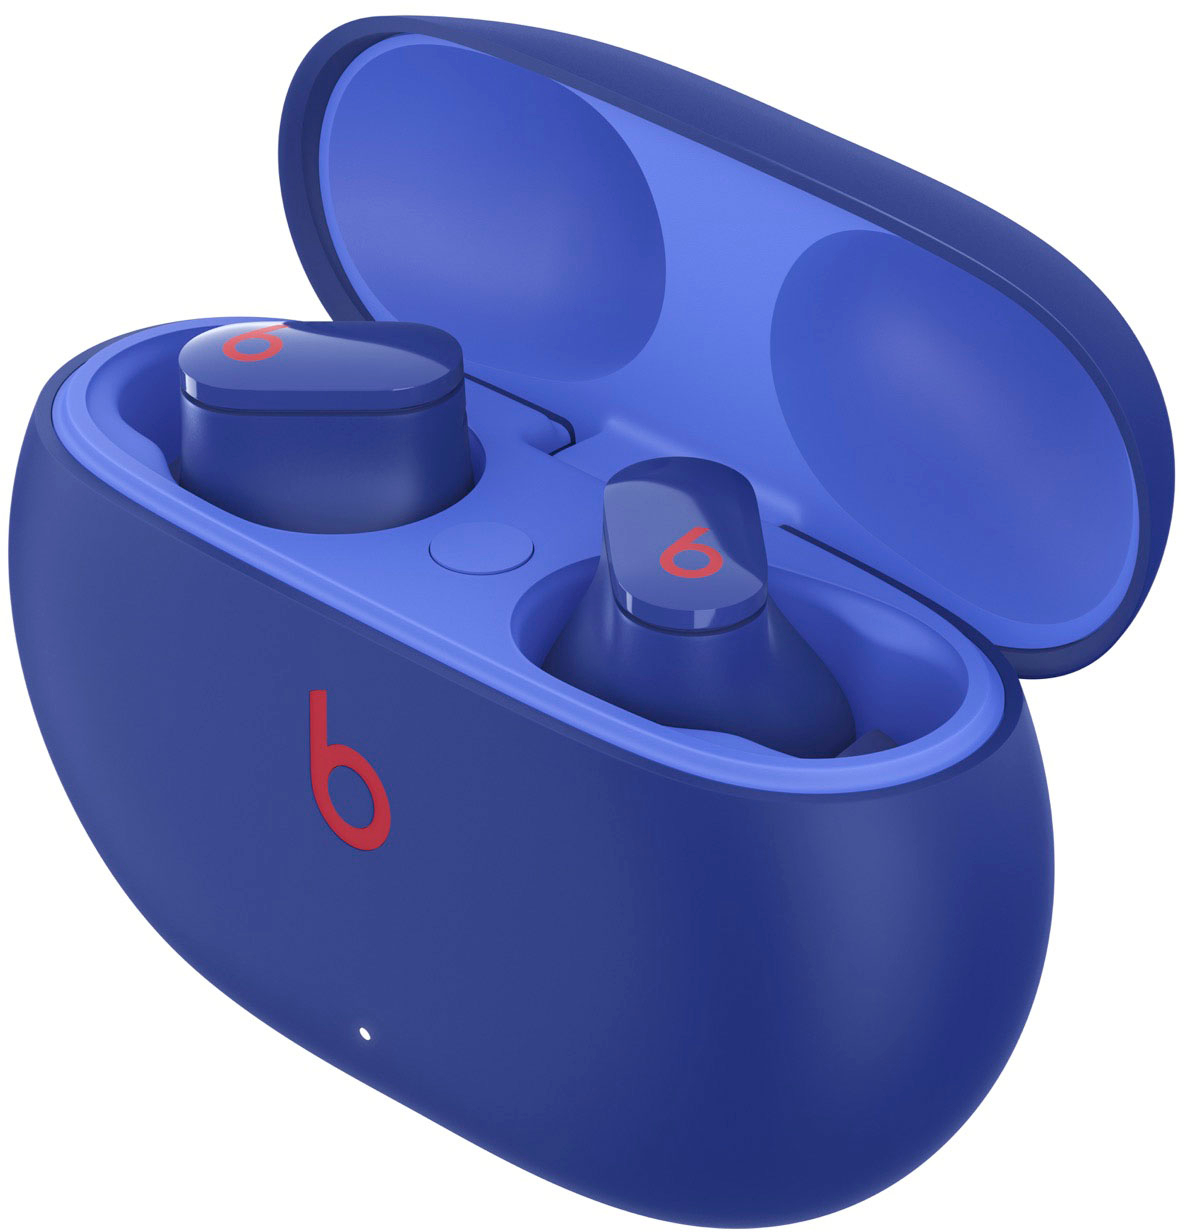 Beats Studio Buds Totally Wireless Noise Cancelling Earbuds White MJ4Y3LL/A  - Best Buy